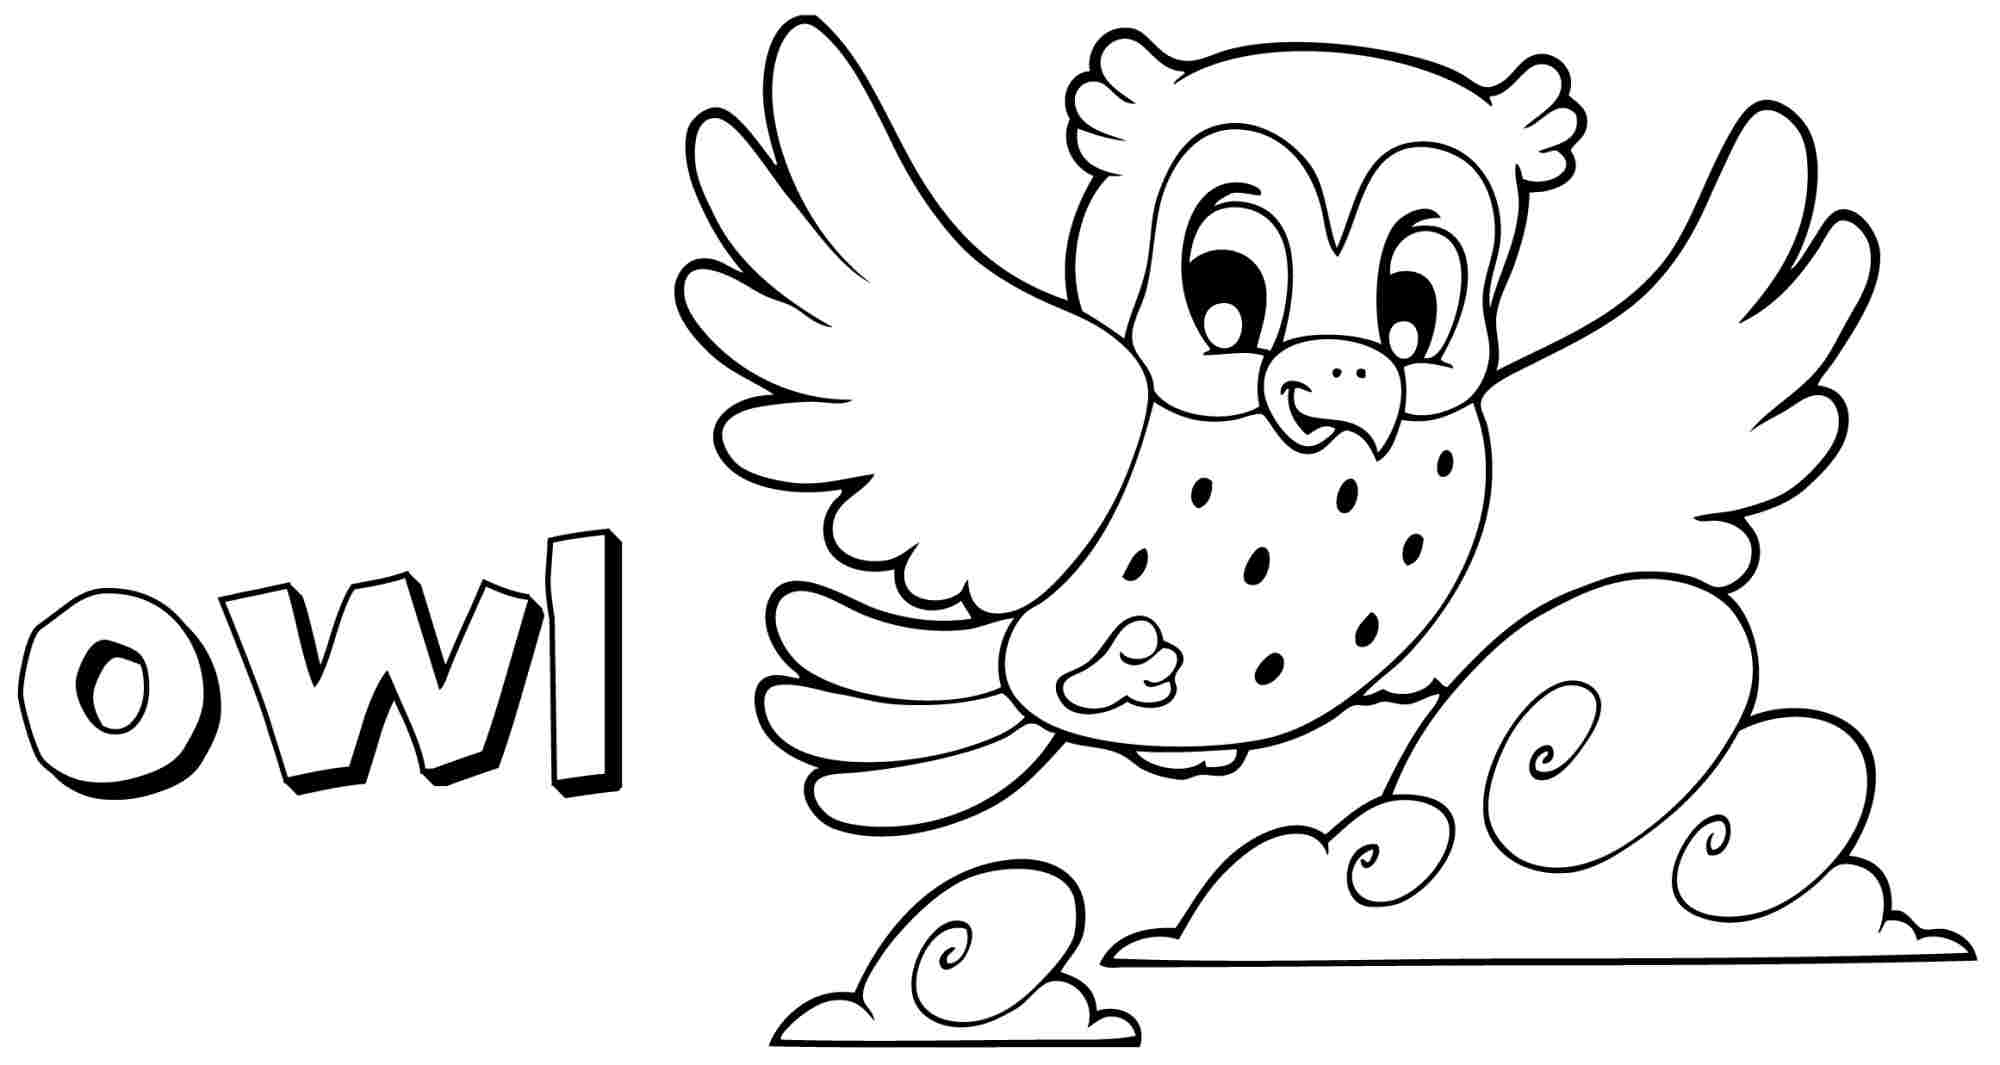 owl-coloring-page-0053-q1